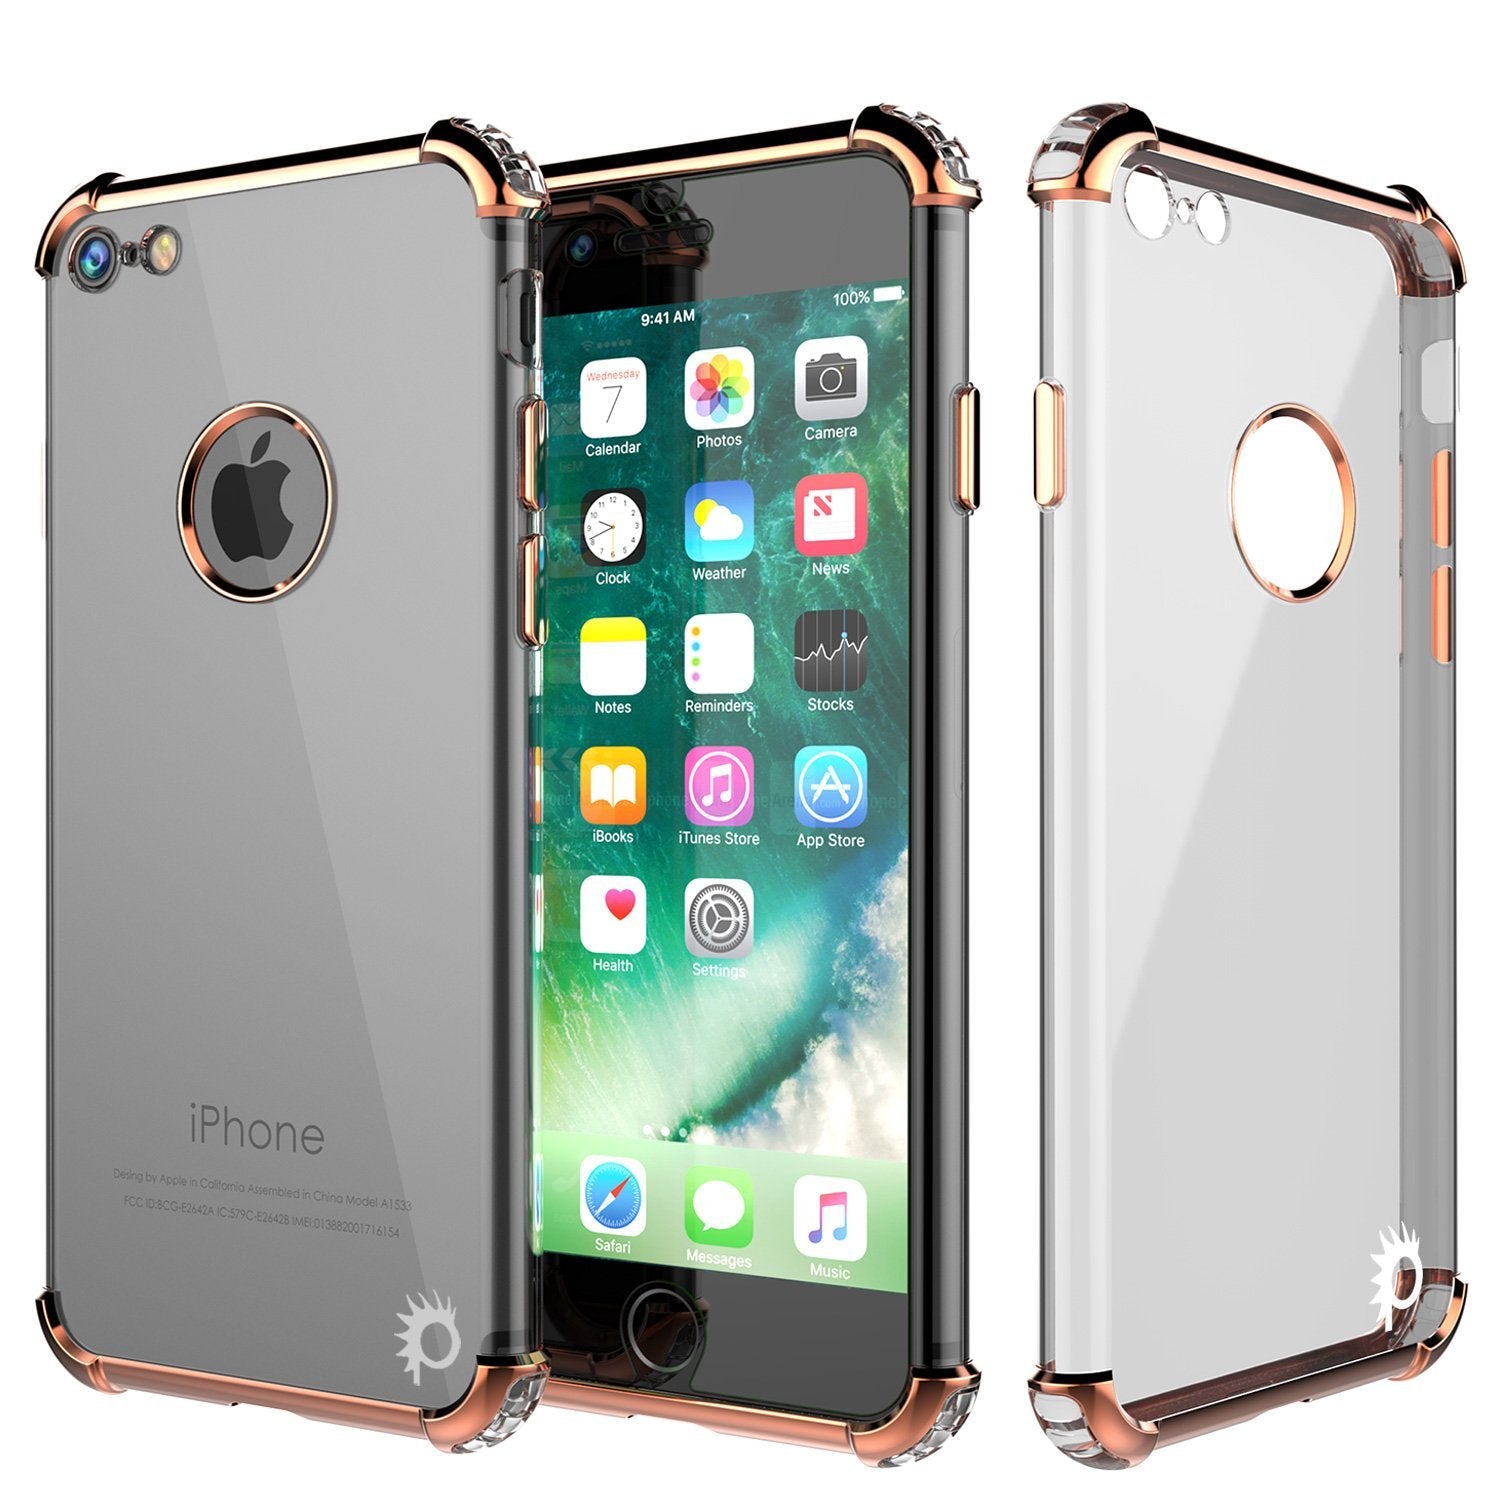 iPhone SE (4.7") Case, Punkcase [BLAZE SERIES] Protective Cover W/ PunkShield Screen Protector [Shockproof] [Slim Fit] for Apple iPhone [RoseGold]